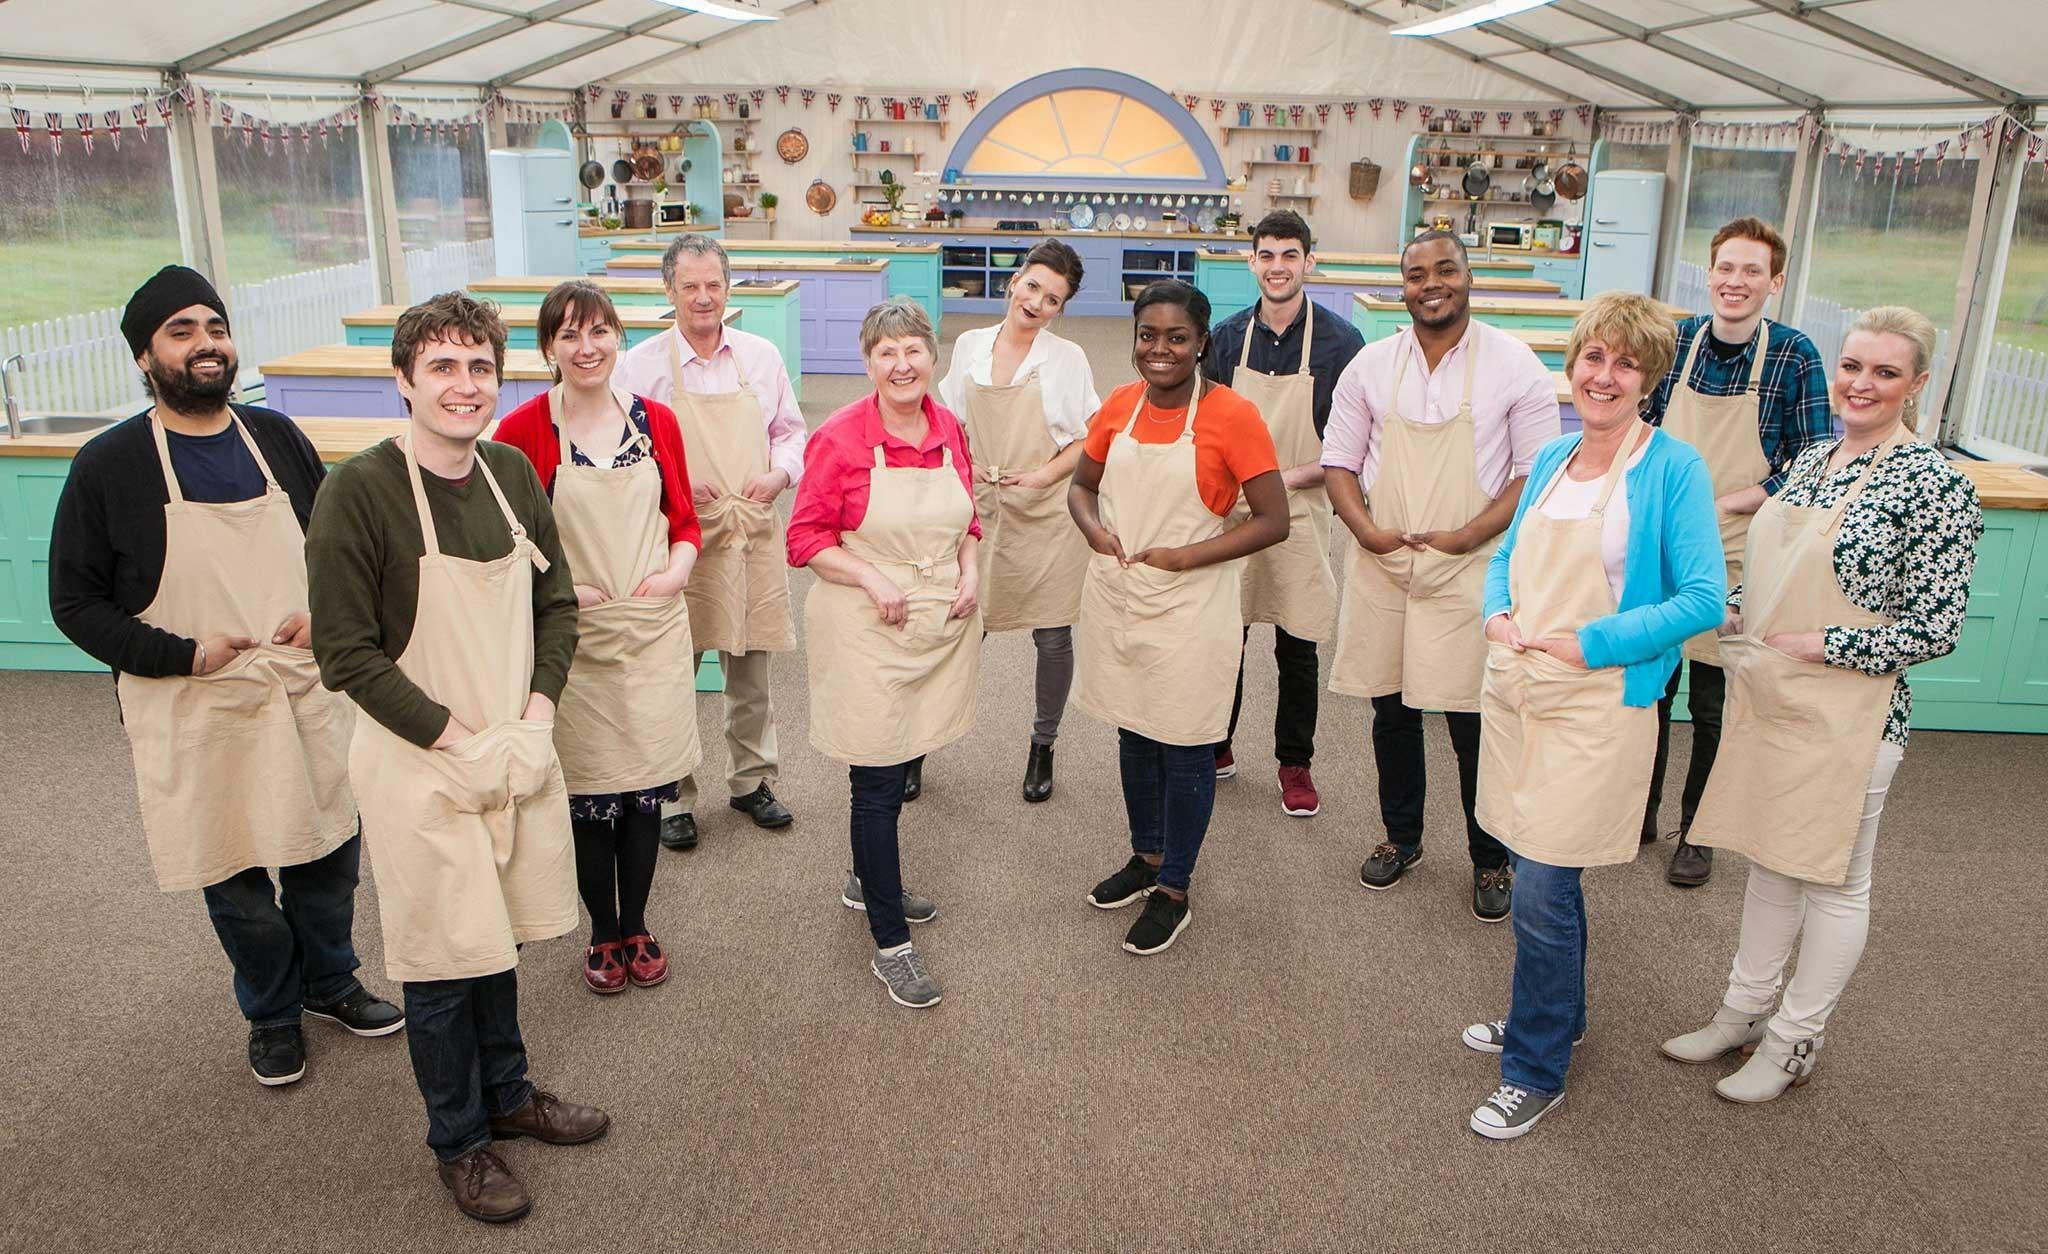 Great British Bake Off 2016 Who will win, judging by the contestants Instagram accounts and blogs? The Independent The Independent pic